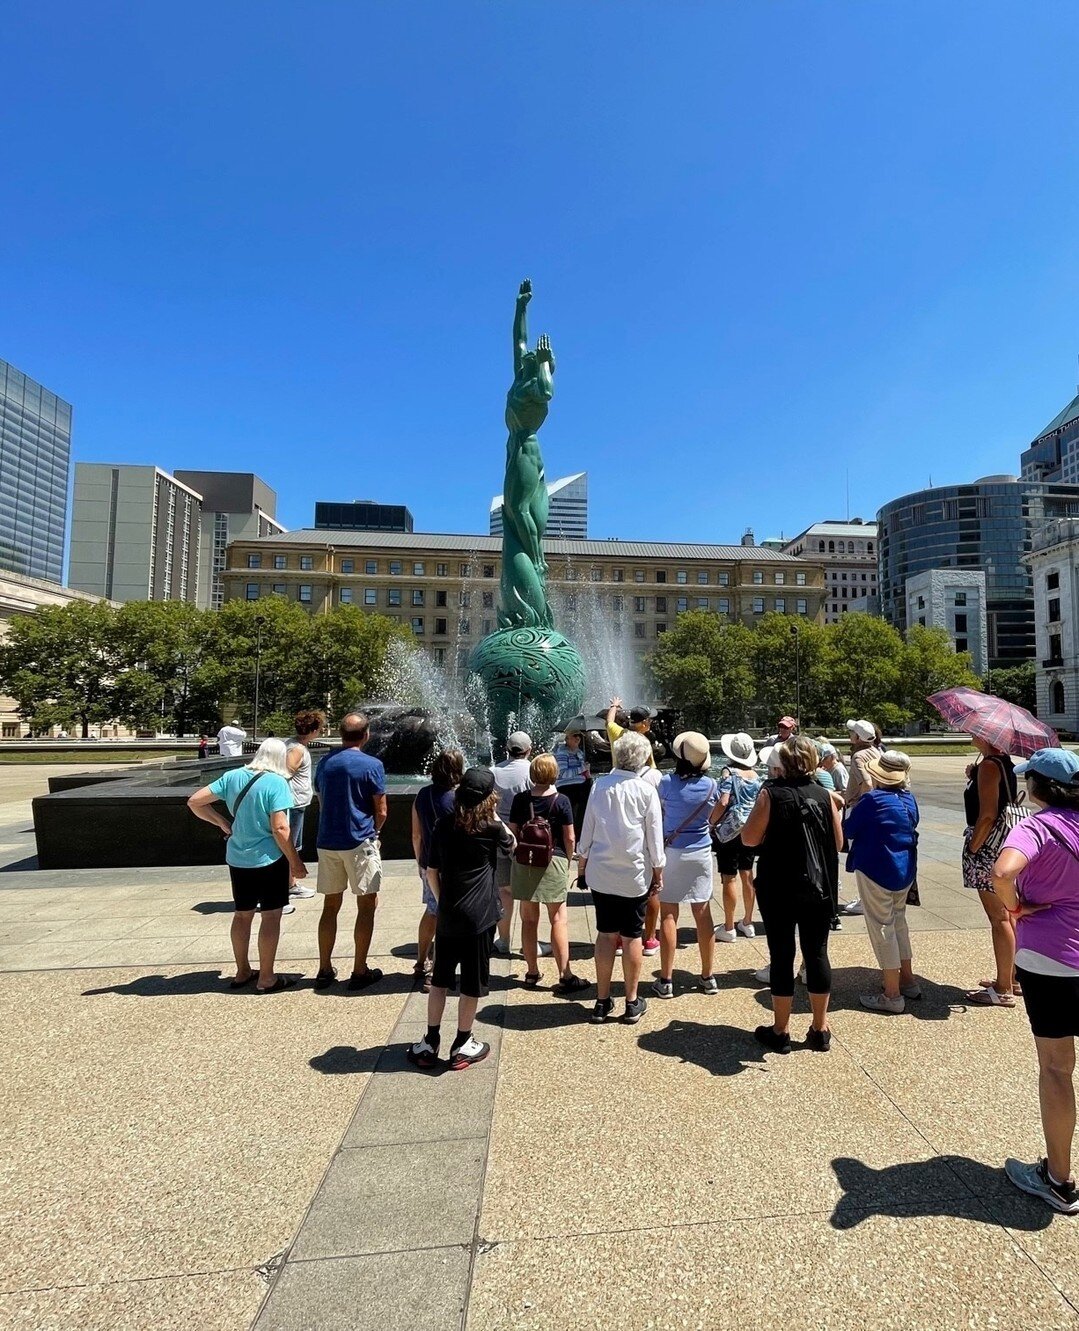 The last month of in-person tours of 2022 is here! Join us on a guided tour this month before the end of the season! As a reminder, in-person tours offered are:⁠
⁠
Gateway District - Sundays 10am⁠
Ohio City - Mondays 6pm⁠
Superior Arts District - Tue